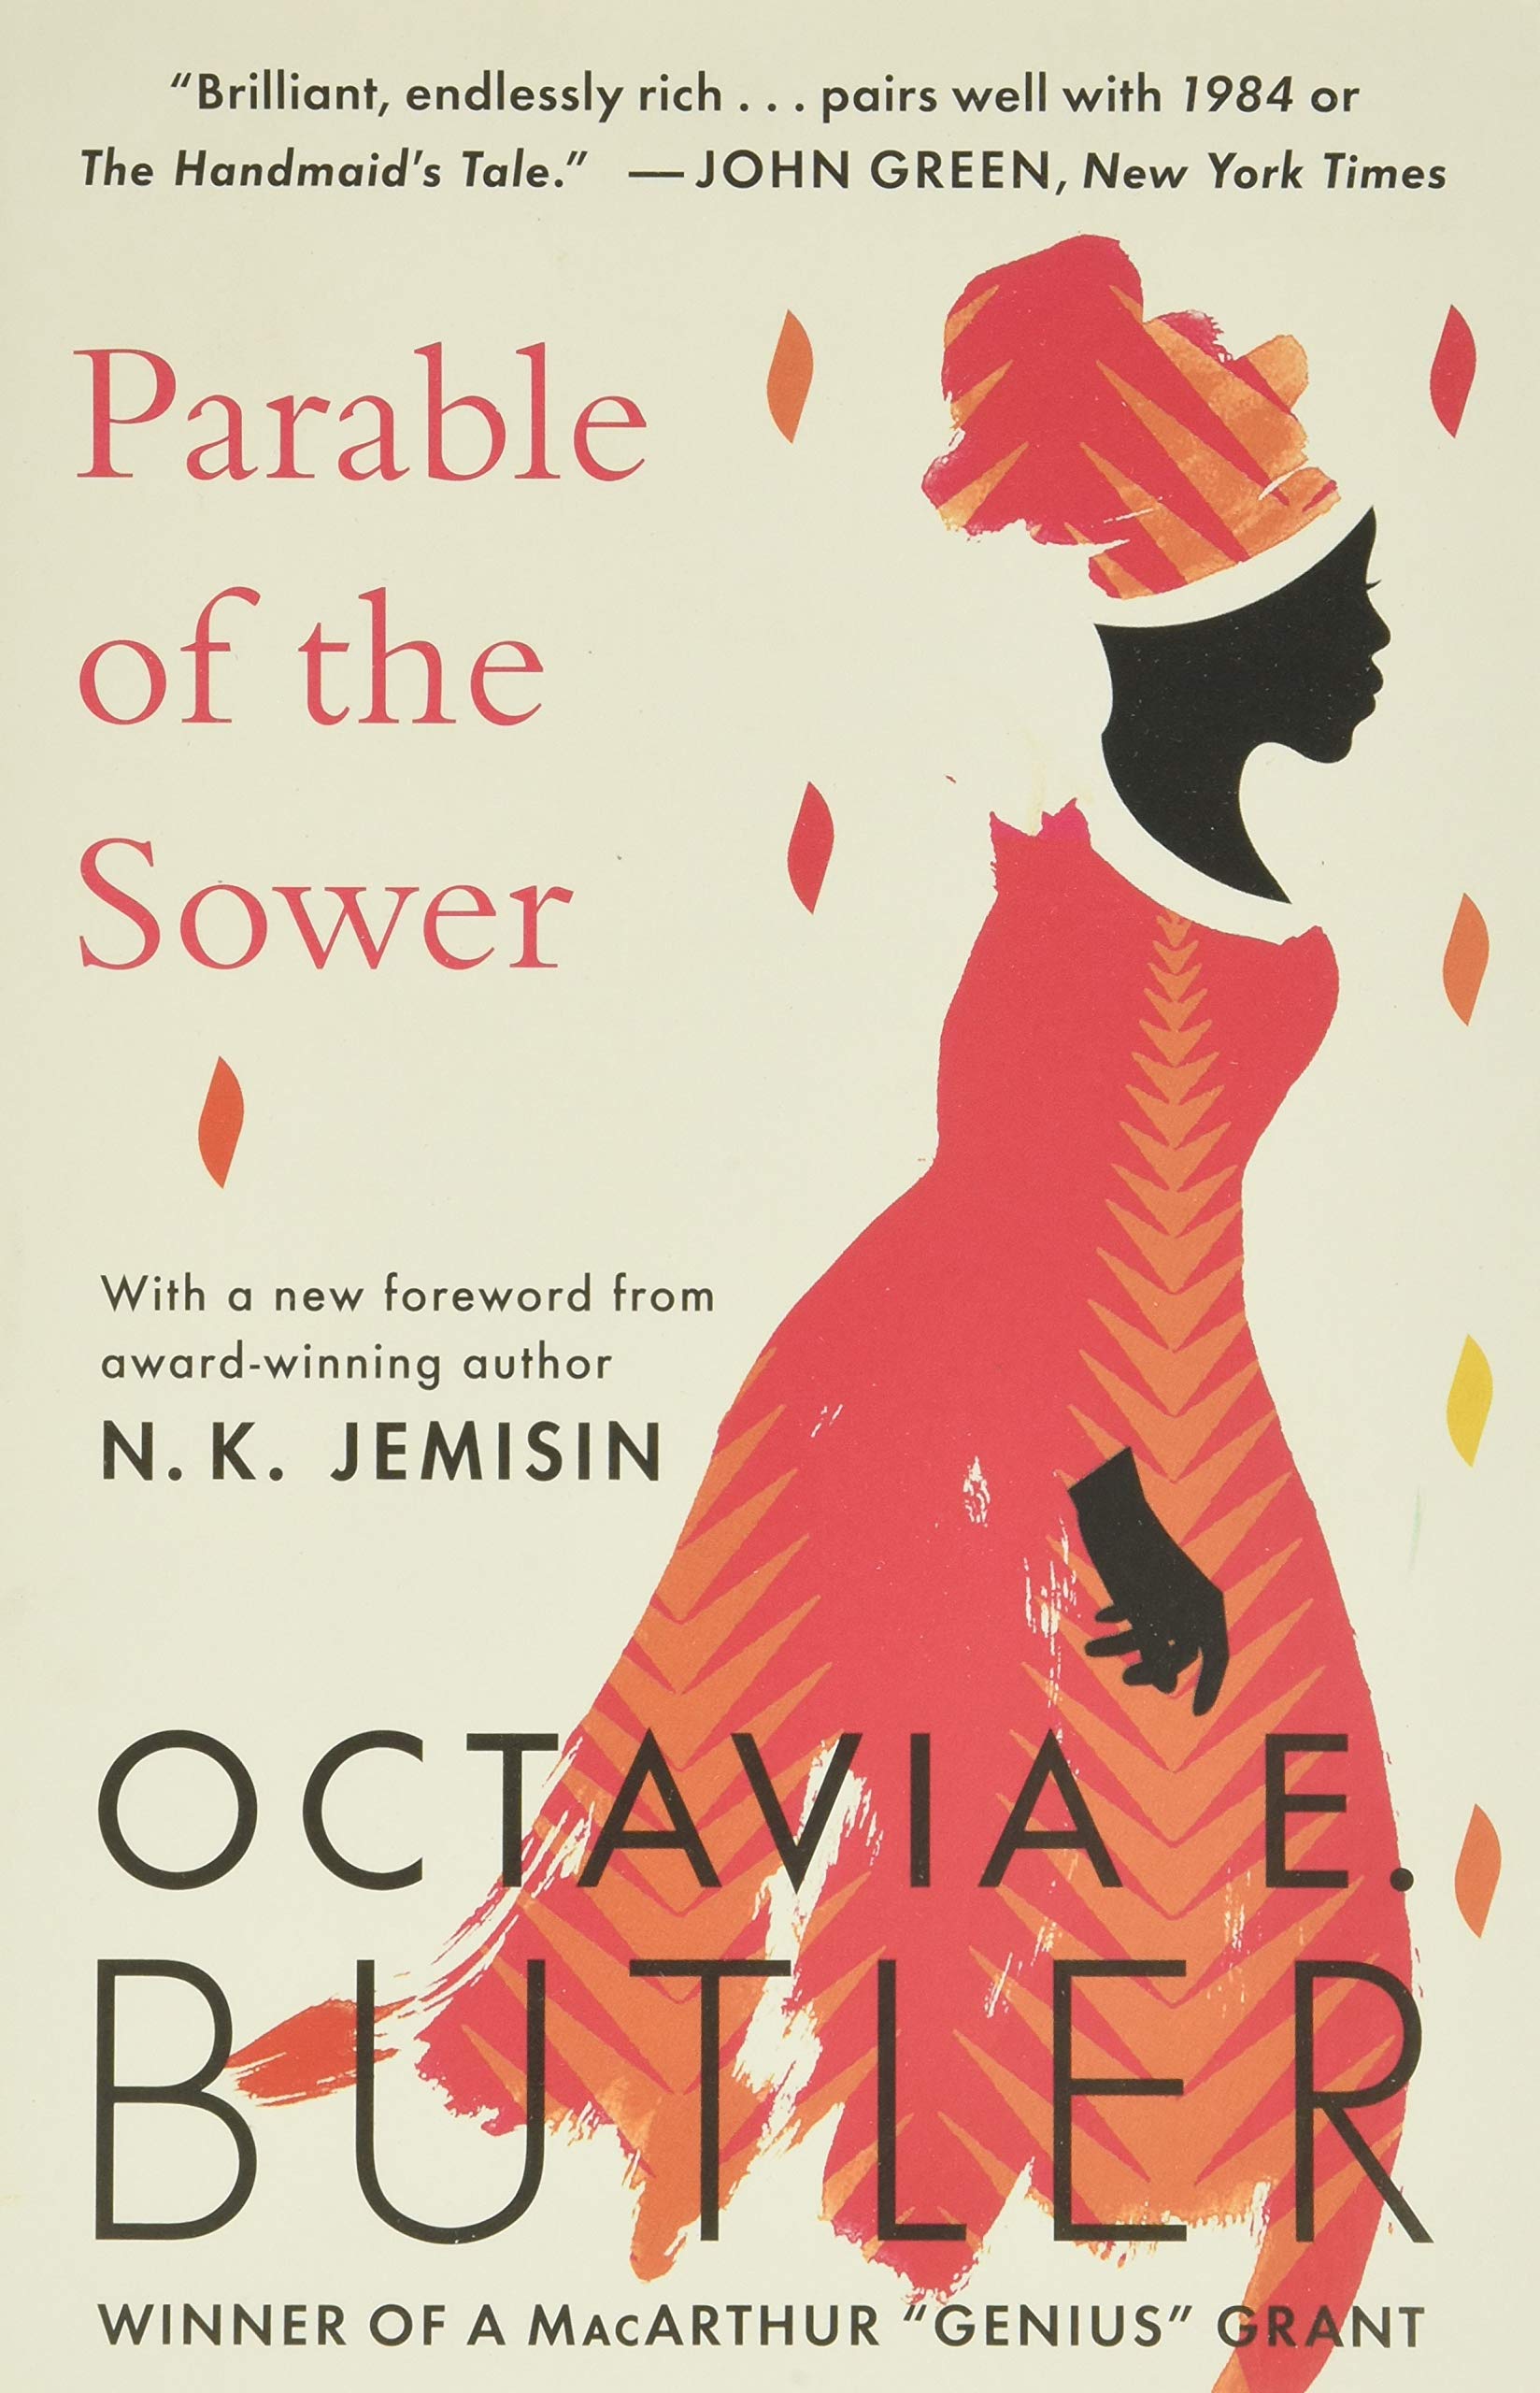 Review: The Parable of the Sower – How The Main Character Spreads Her Religion